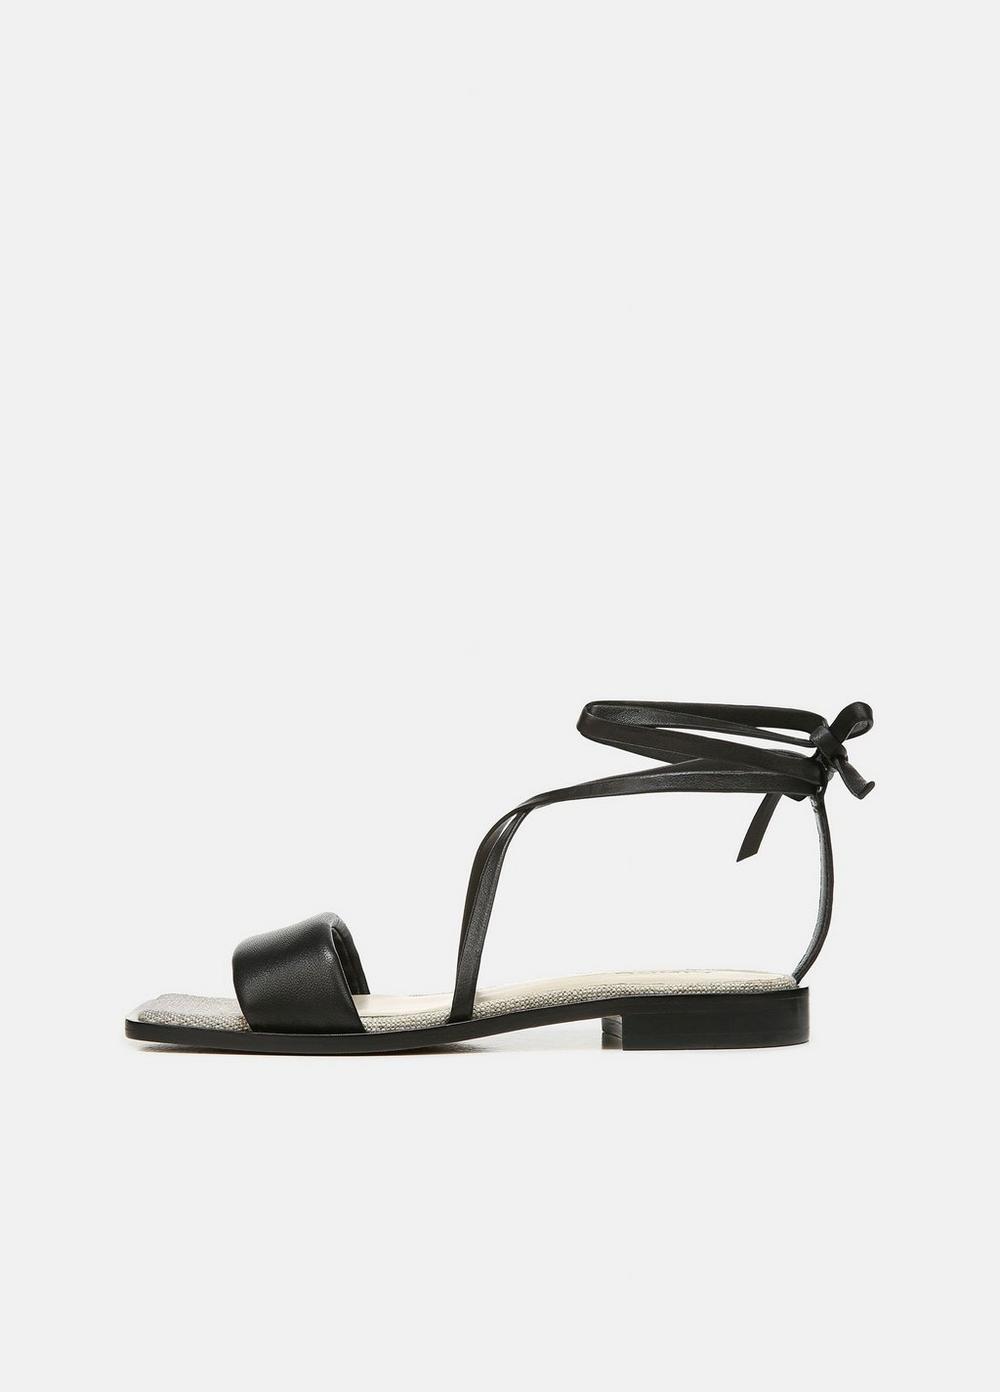 Layla Leather Wrap Sandal for Women | Vince